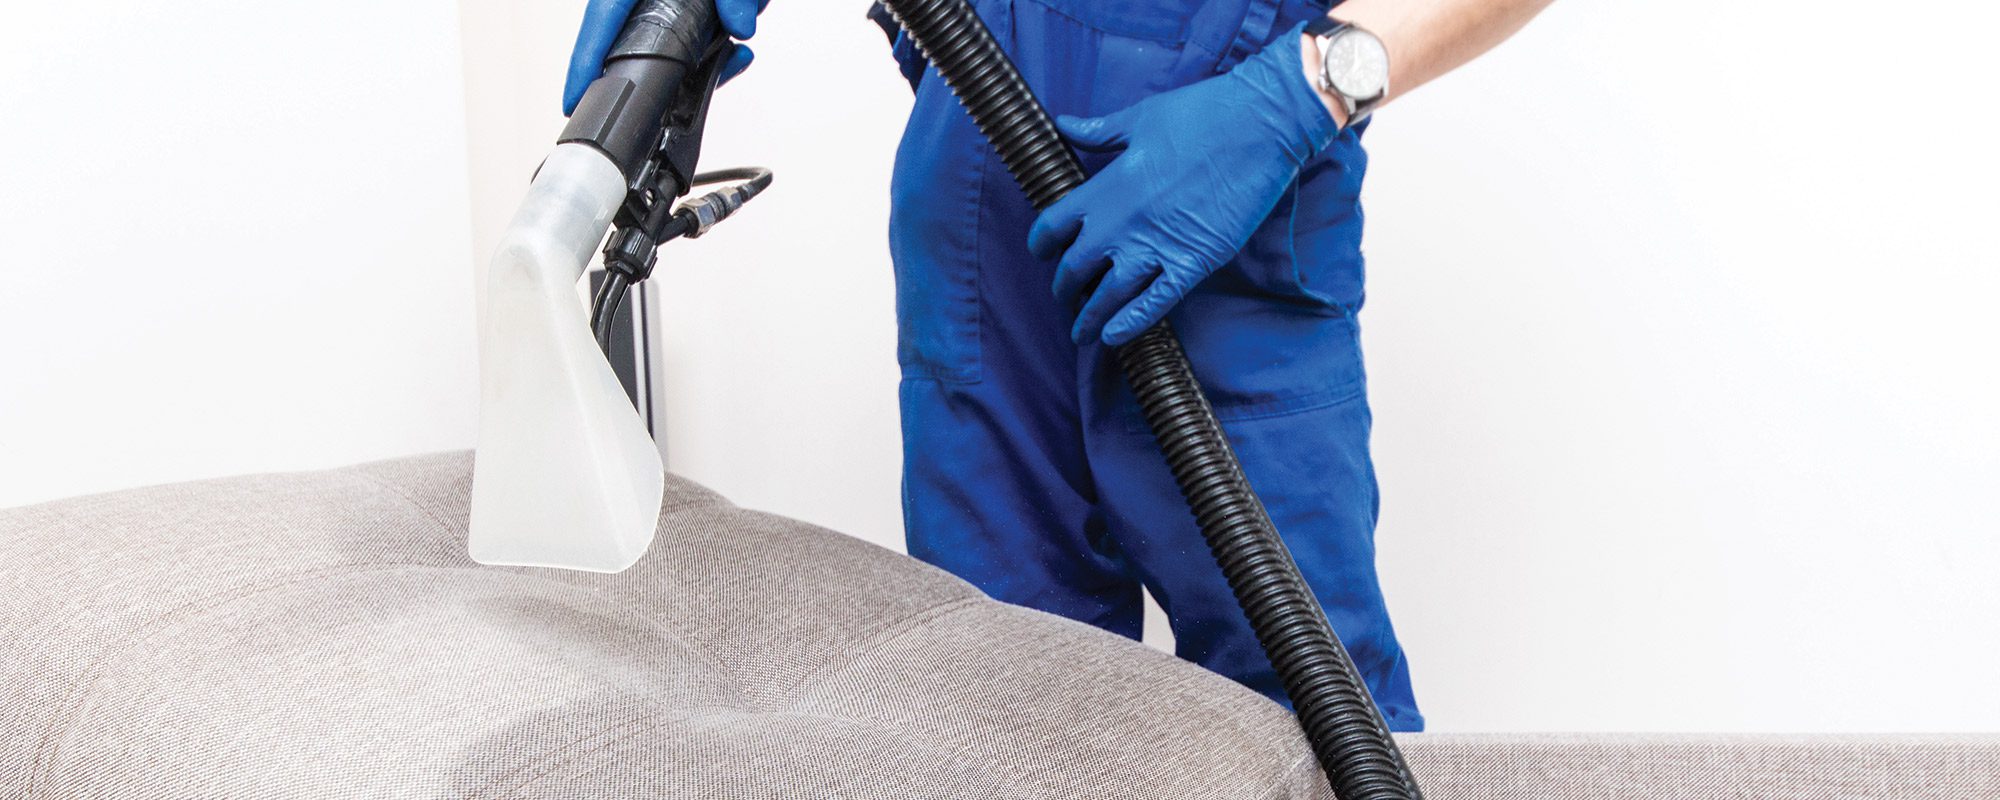 Carpet Cleaning Jobs